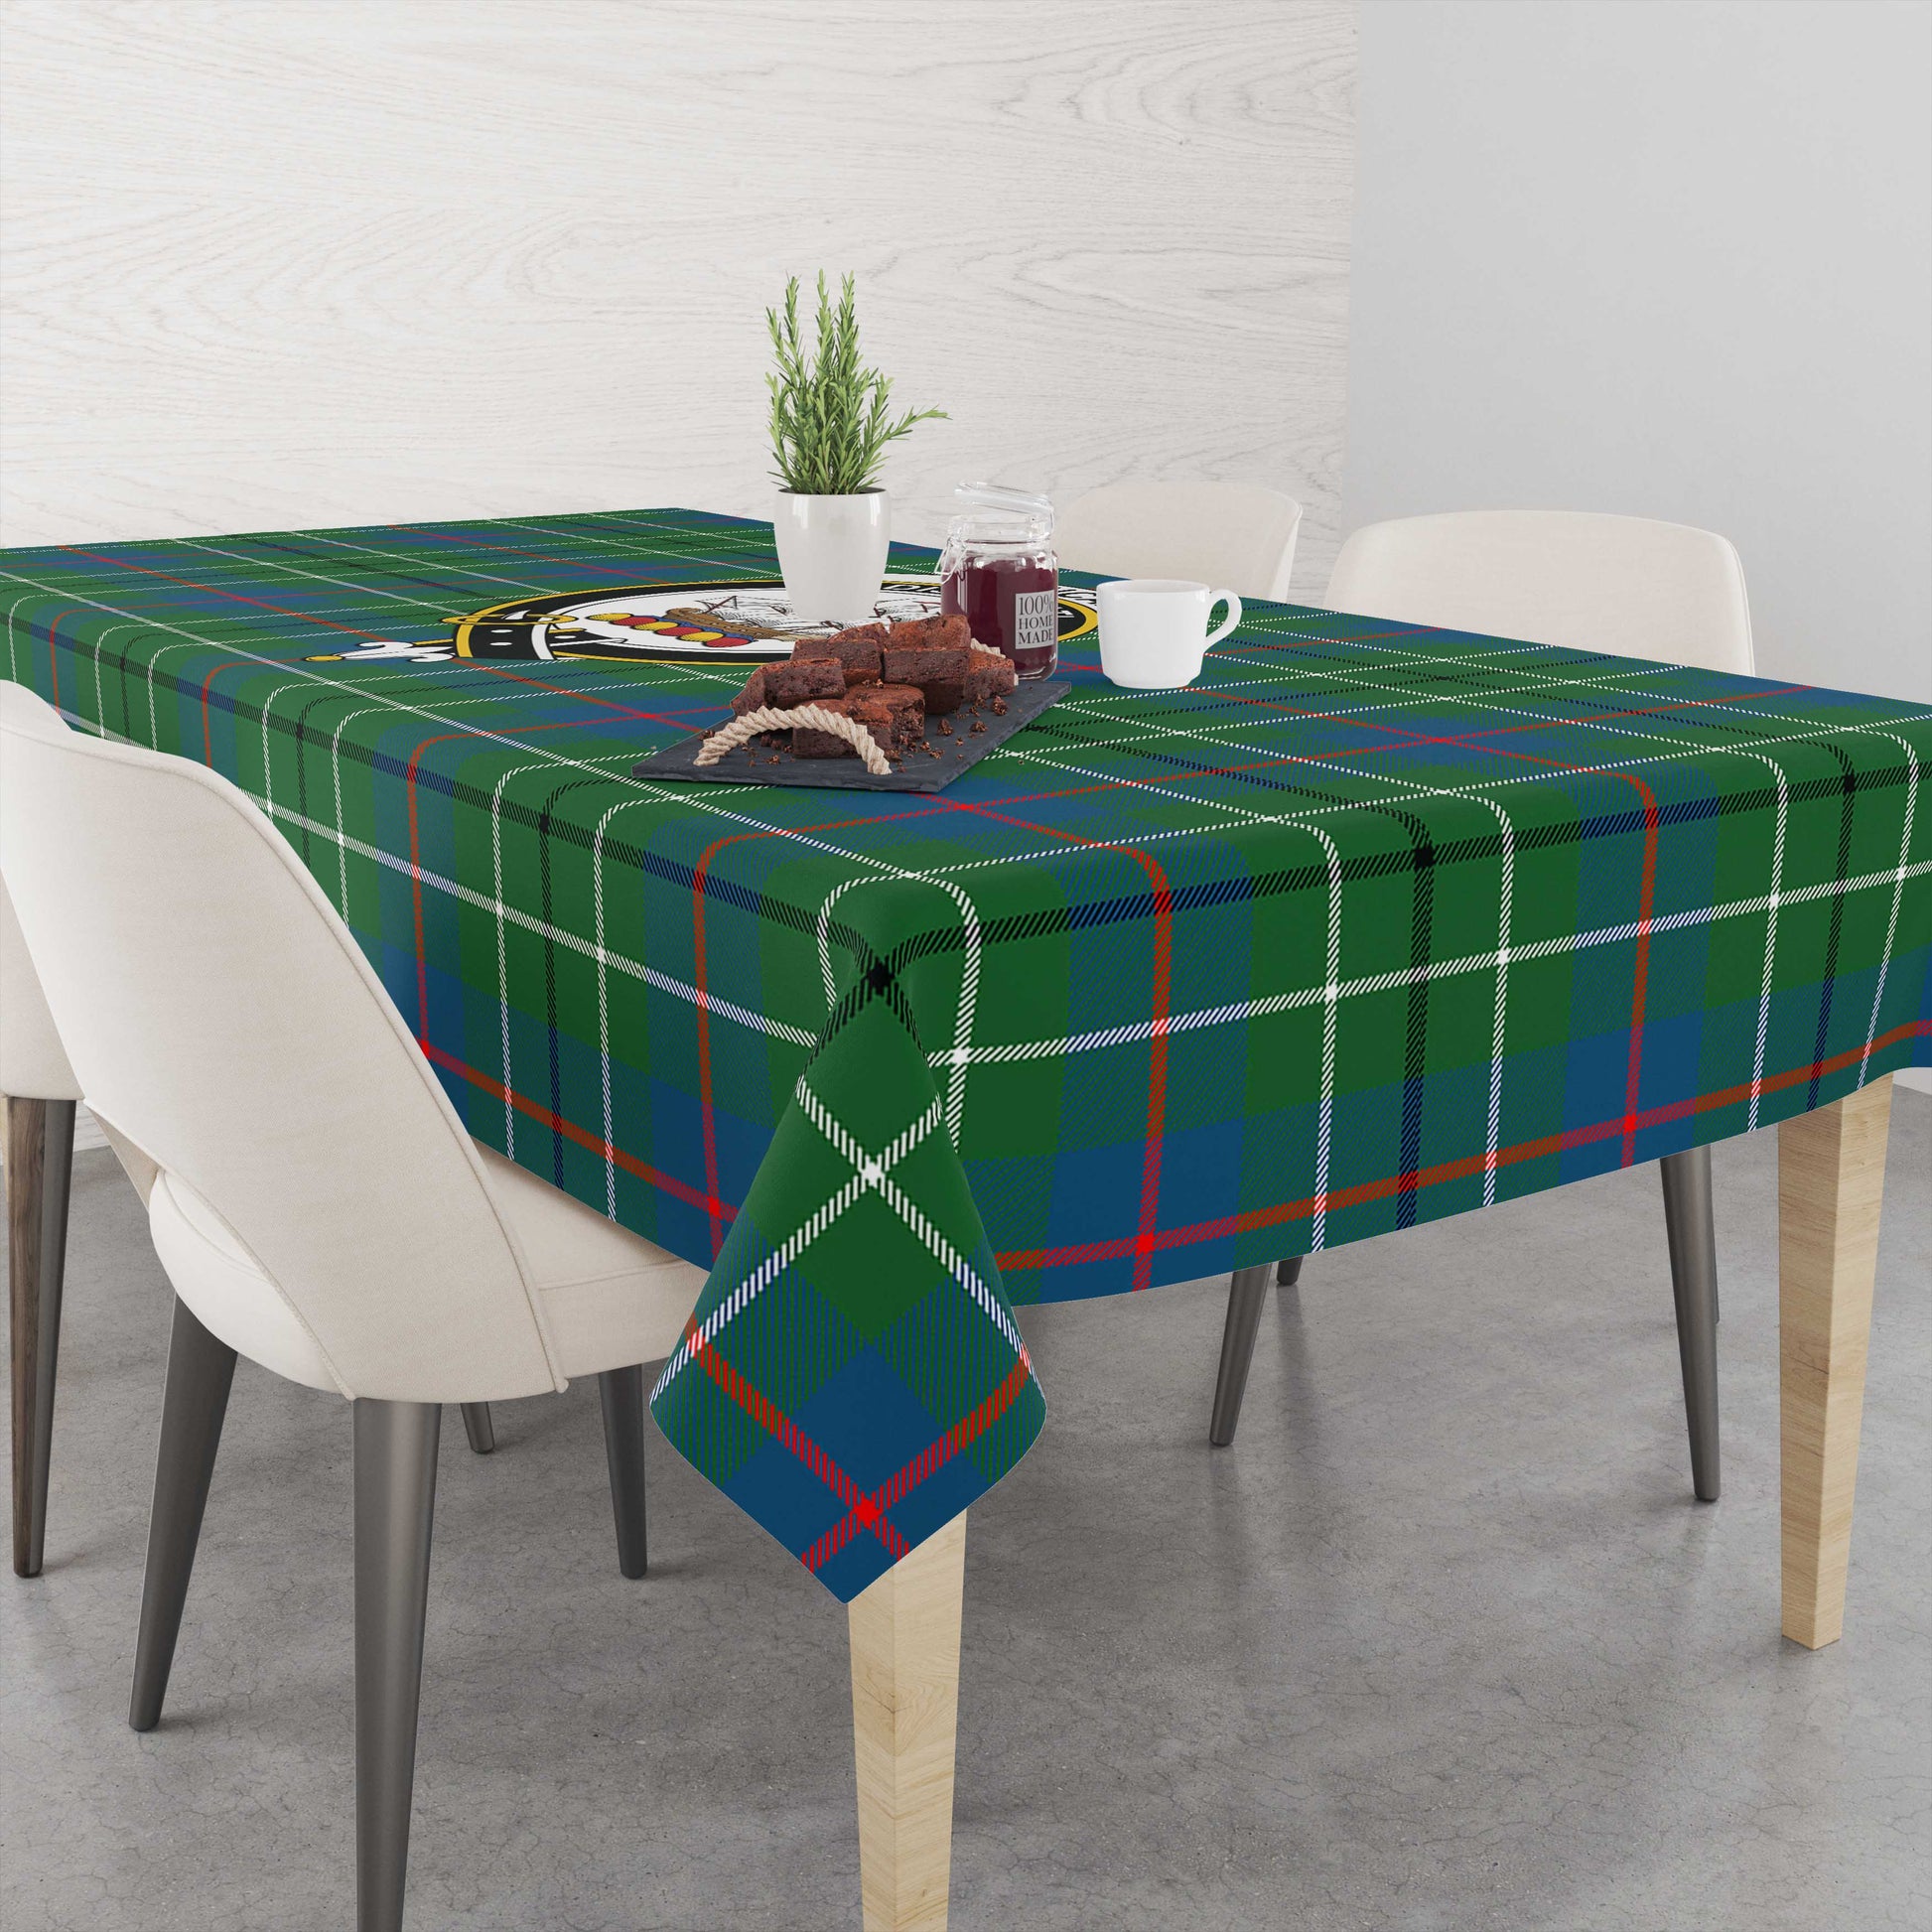 duncan-ancient-tatan-tablecloth-with-family-crest